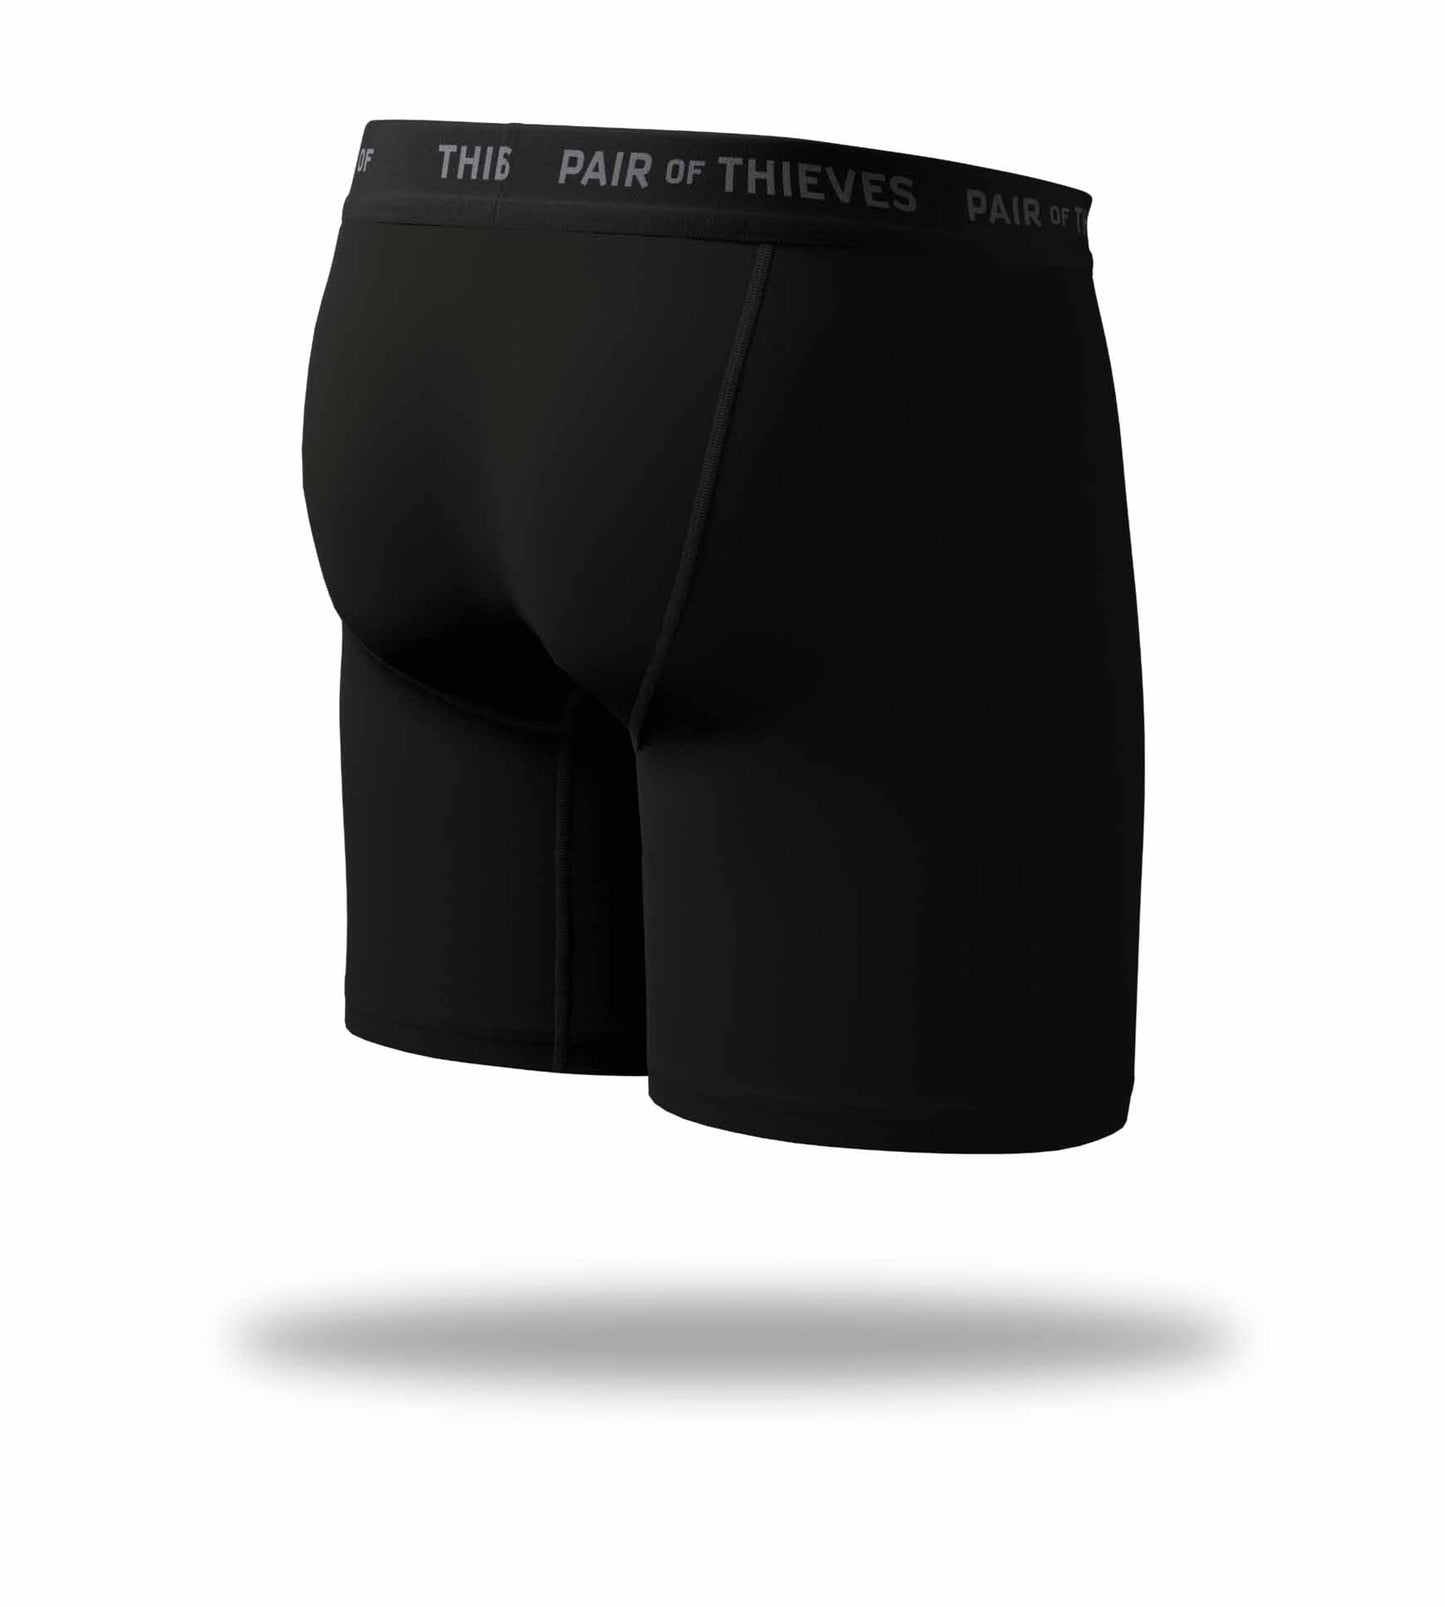 SuperSoft Long Boxer Brief 2 Pack colors consists of Black, White, Light Gray, Black, Dark Gray, Gains boro, Black, Dim gray, Black, Dark slate gray